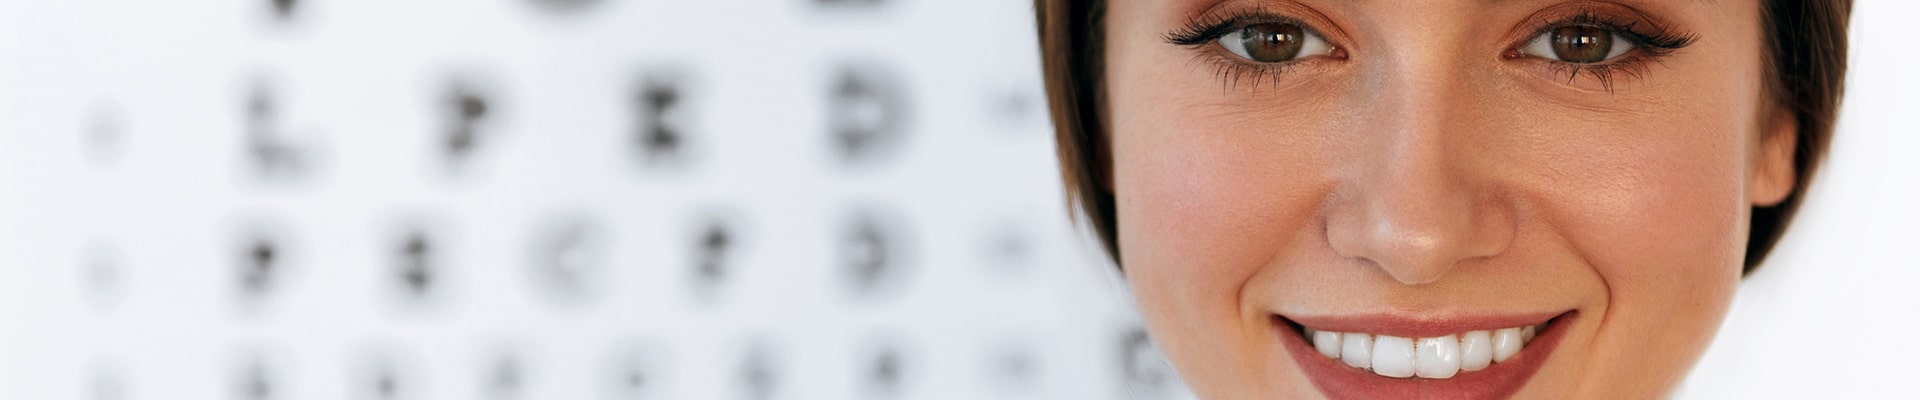 What Can Your Eyes Tell You About Your Health?